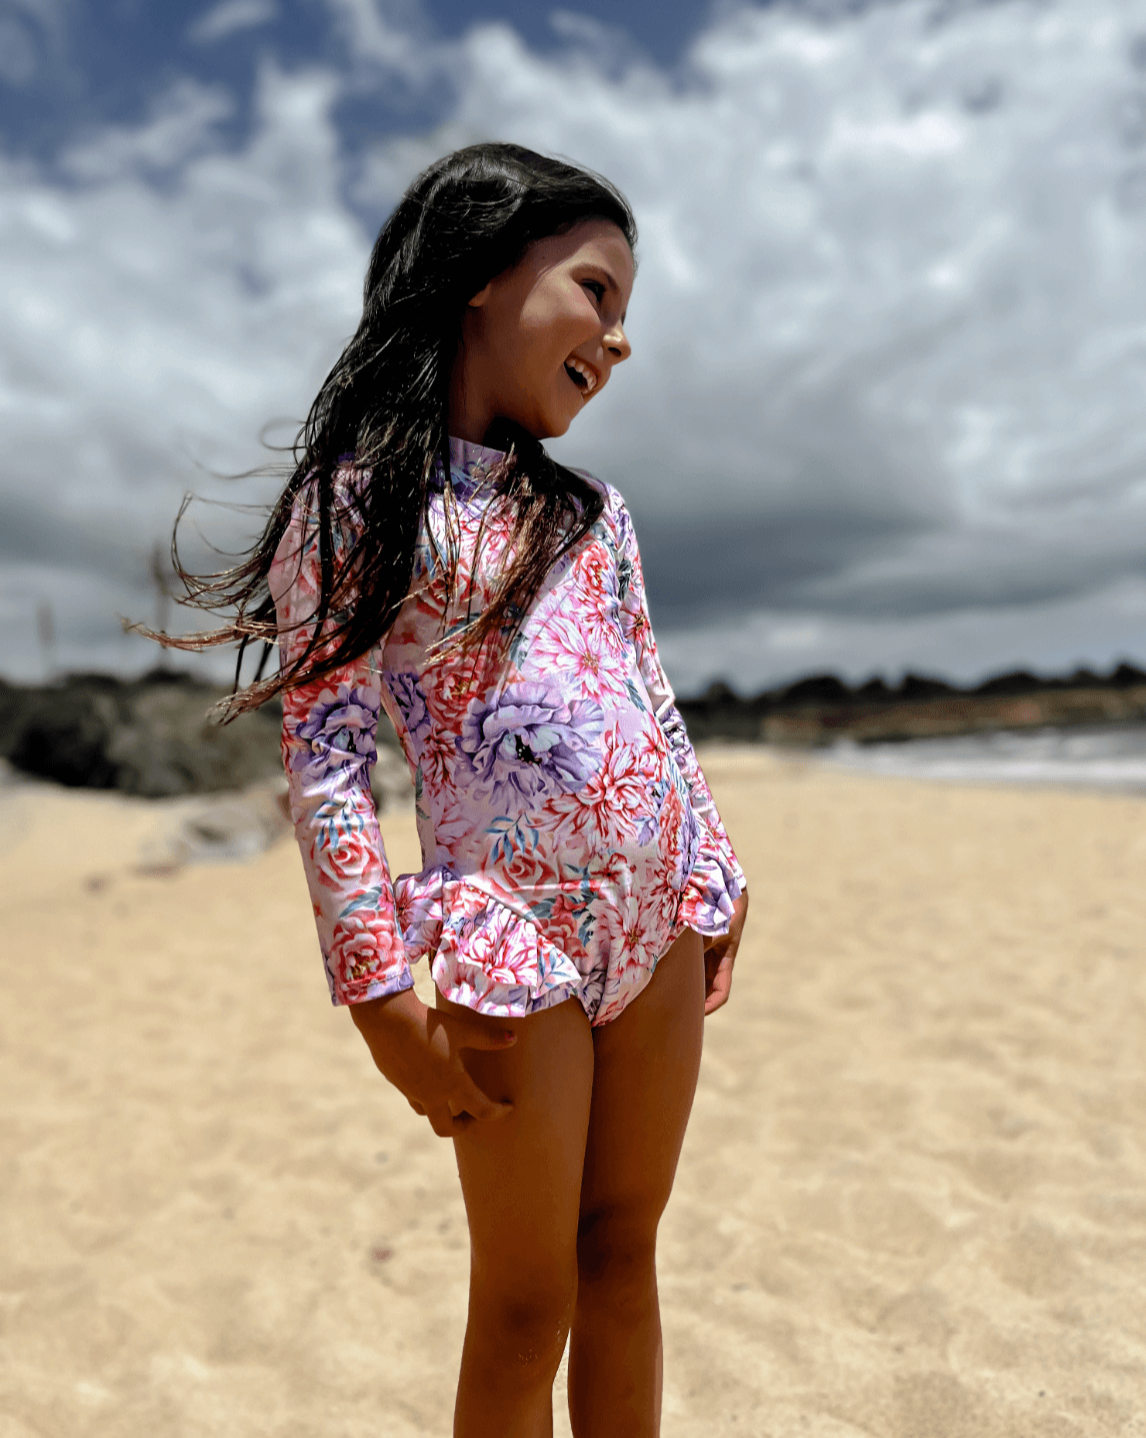 Girl at beach wearing a premium long sleeve swimsuit that has nappy/change snaps in a pink and purple hydrangea and peony floral print.